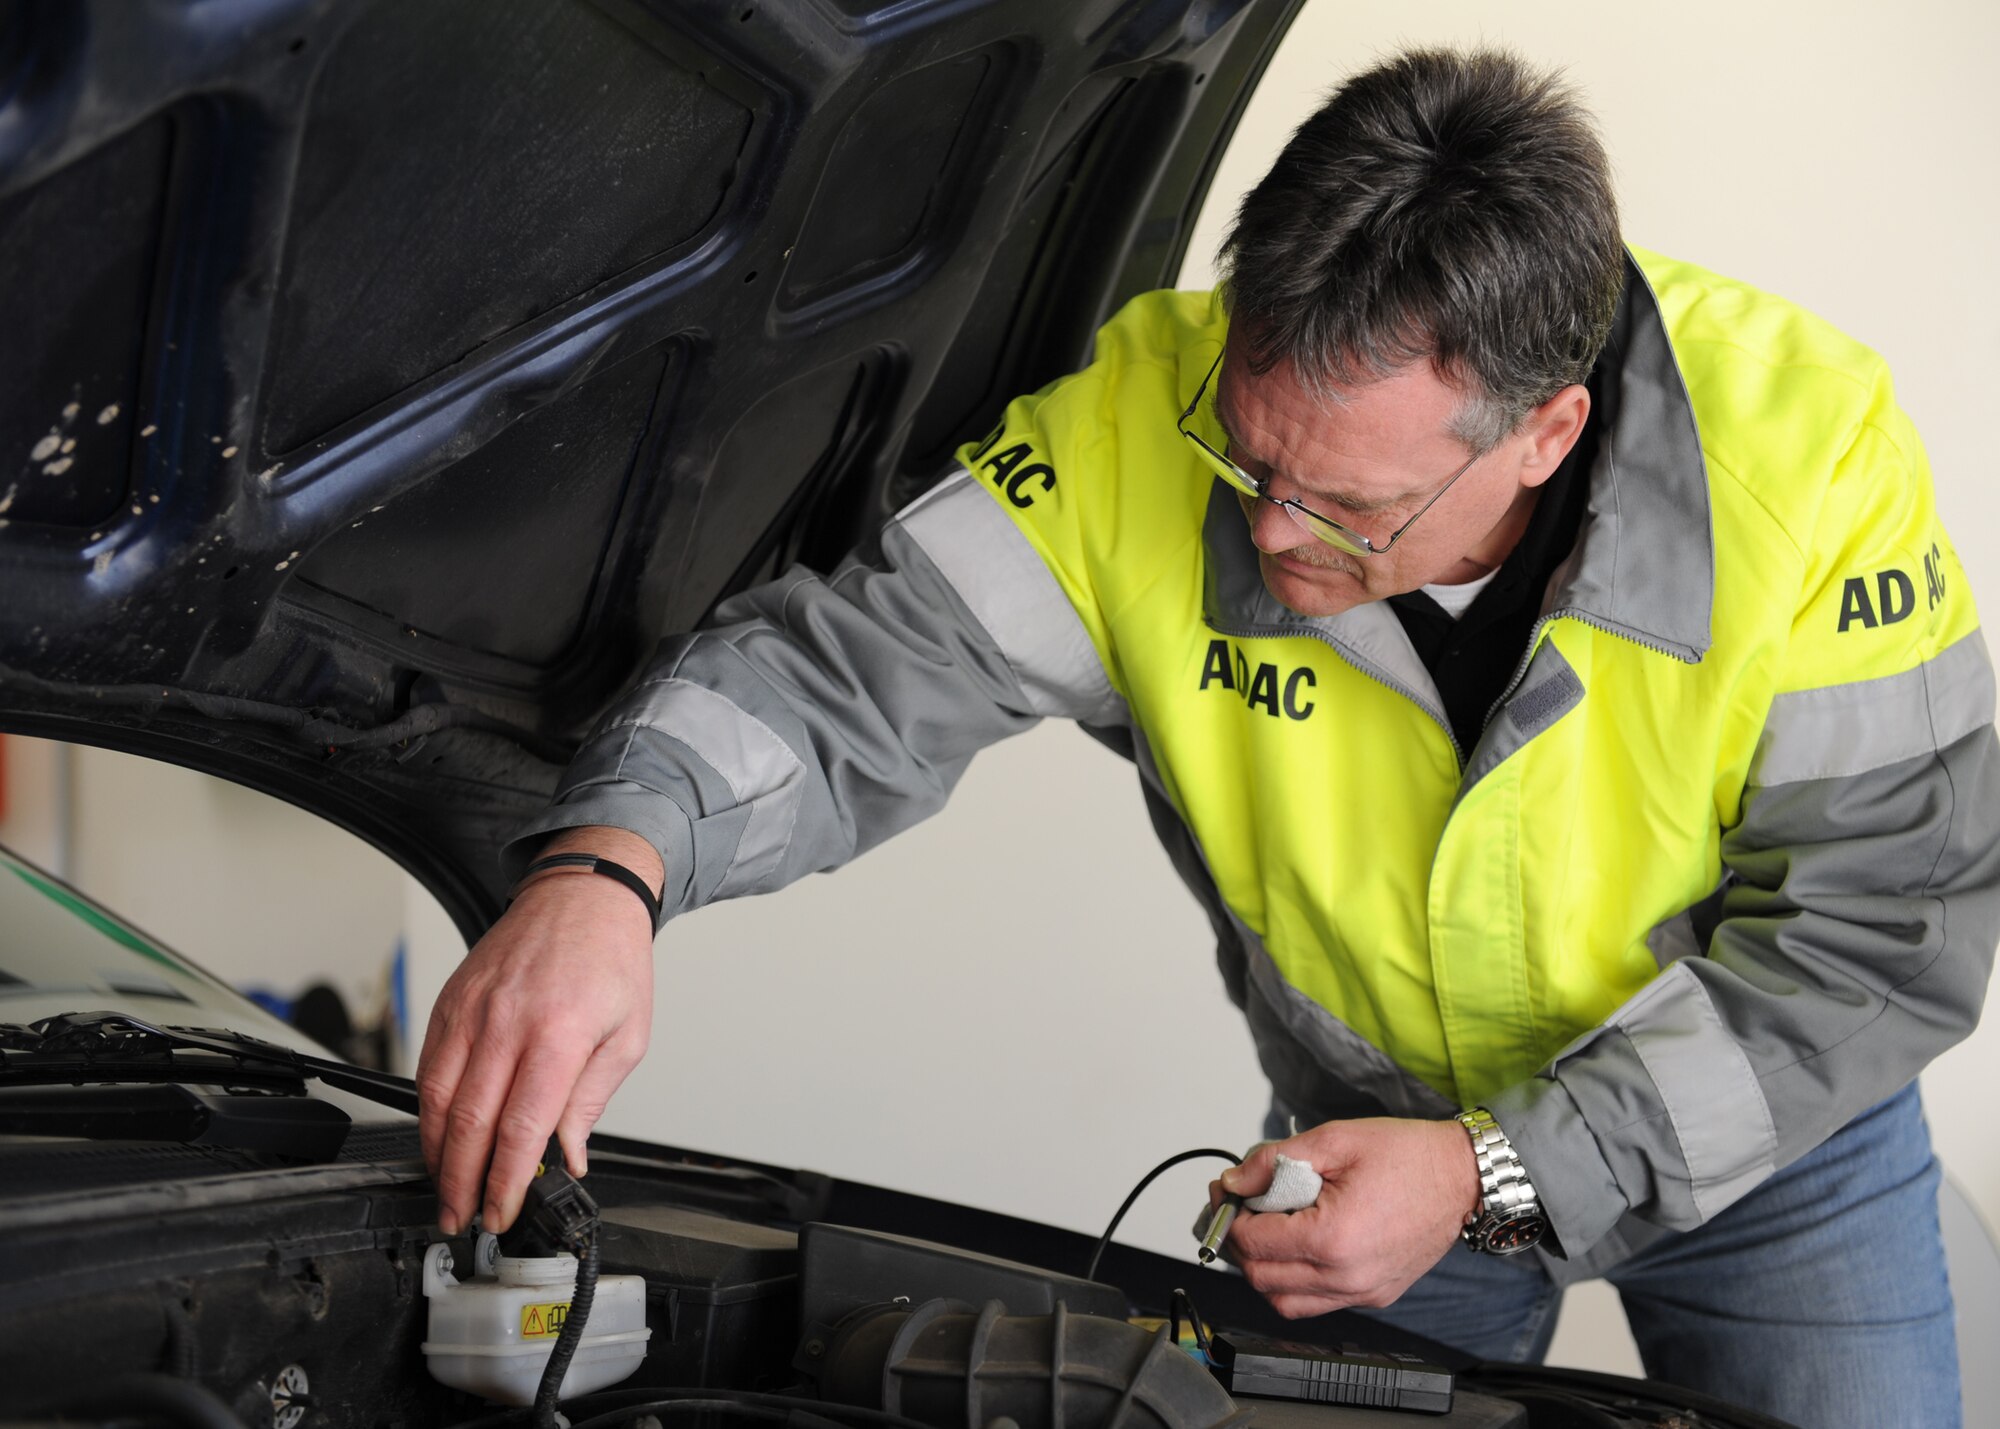 SPANGDAHLEM AIR BASE, Germany – Robert Fuss, ADAC Office of Traffic and Technology chief, checks the brake fluid on a vehicle during a winter safety inspection at the vehicle registration building here Nov. 5. The 52nd Fighter Wing Safety Office and ADAC teamed up to do a free vehicle inspection. The items checked included lights, brake fluid, battery, tires, coolant and other functions to prepare Sabers for safe winter driving. (U.S. Air Force photo/Senior Airman Christopher Toon)